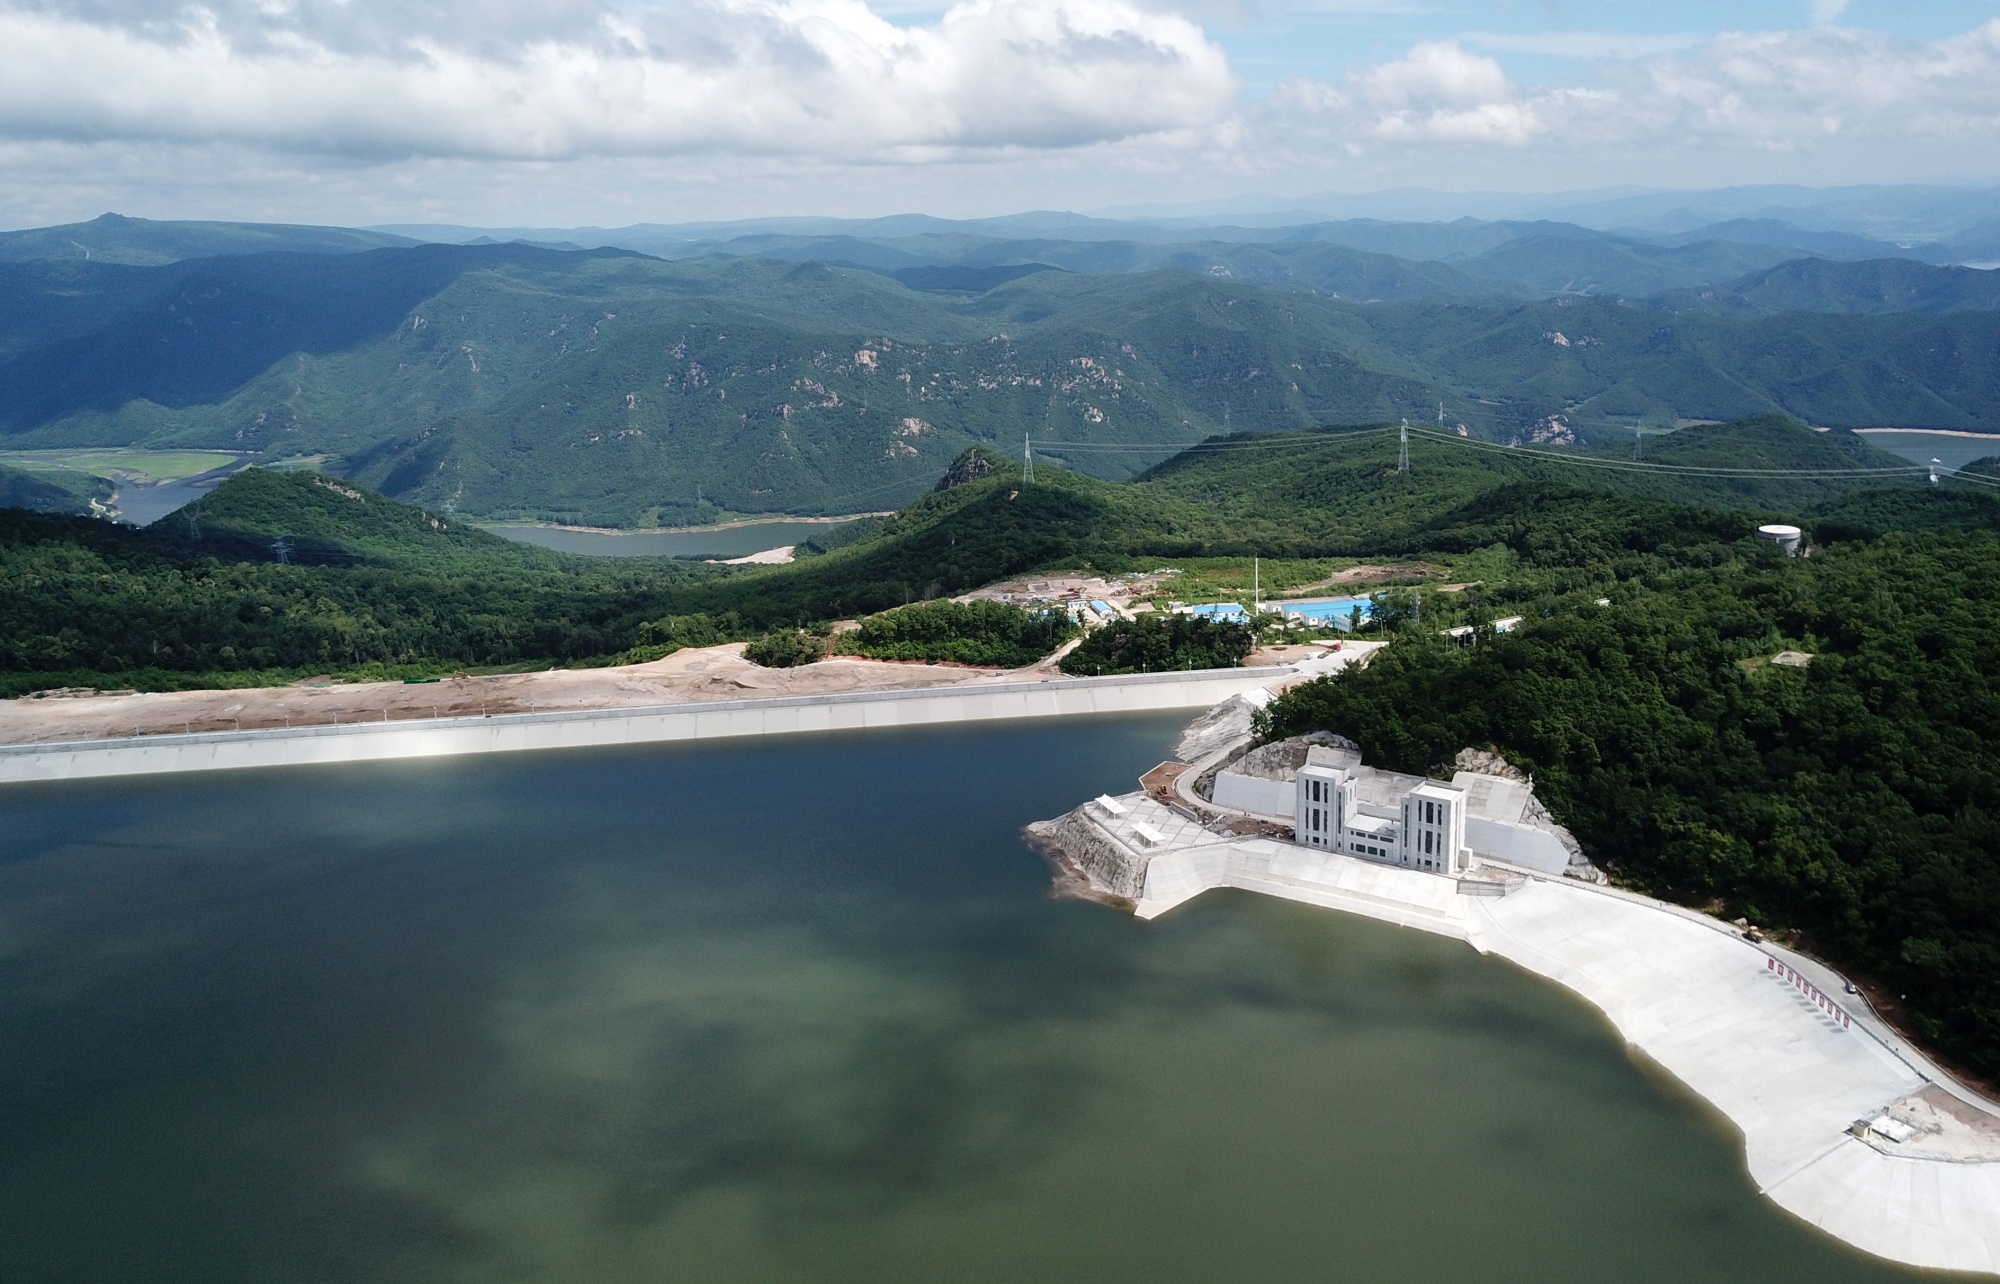 CHINA-HEILONGJIANG-PUMPED-STORAGE HYDROPOWER STATION-AERIAL VIEW (CN)